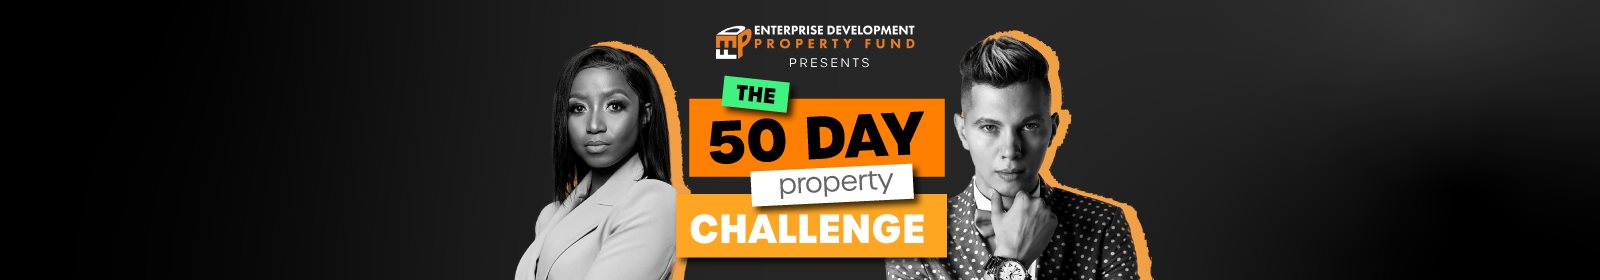 50 Day property challenge